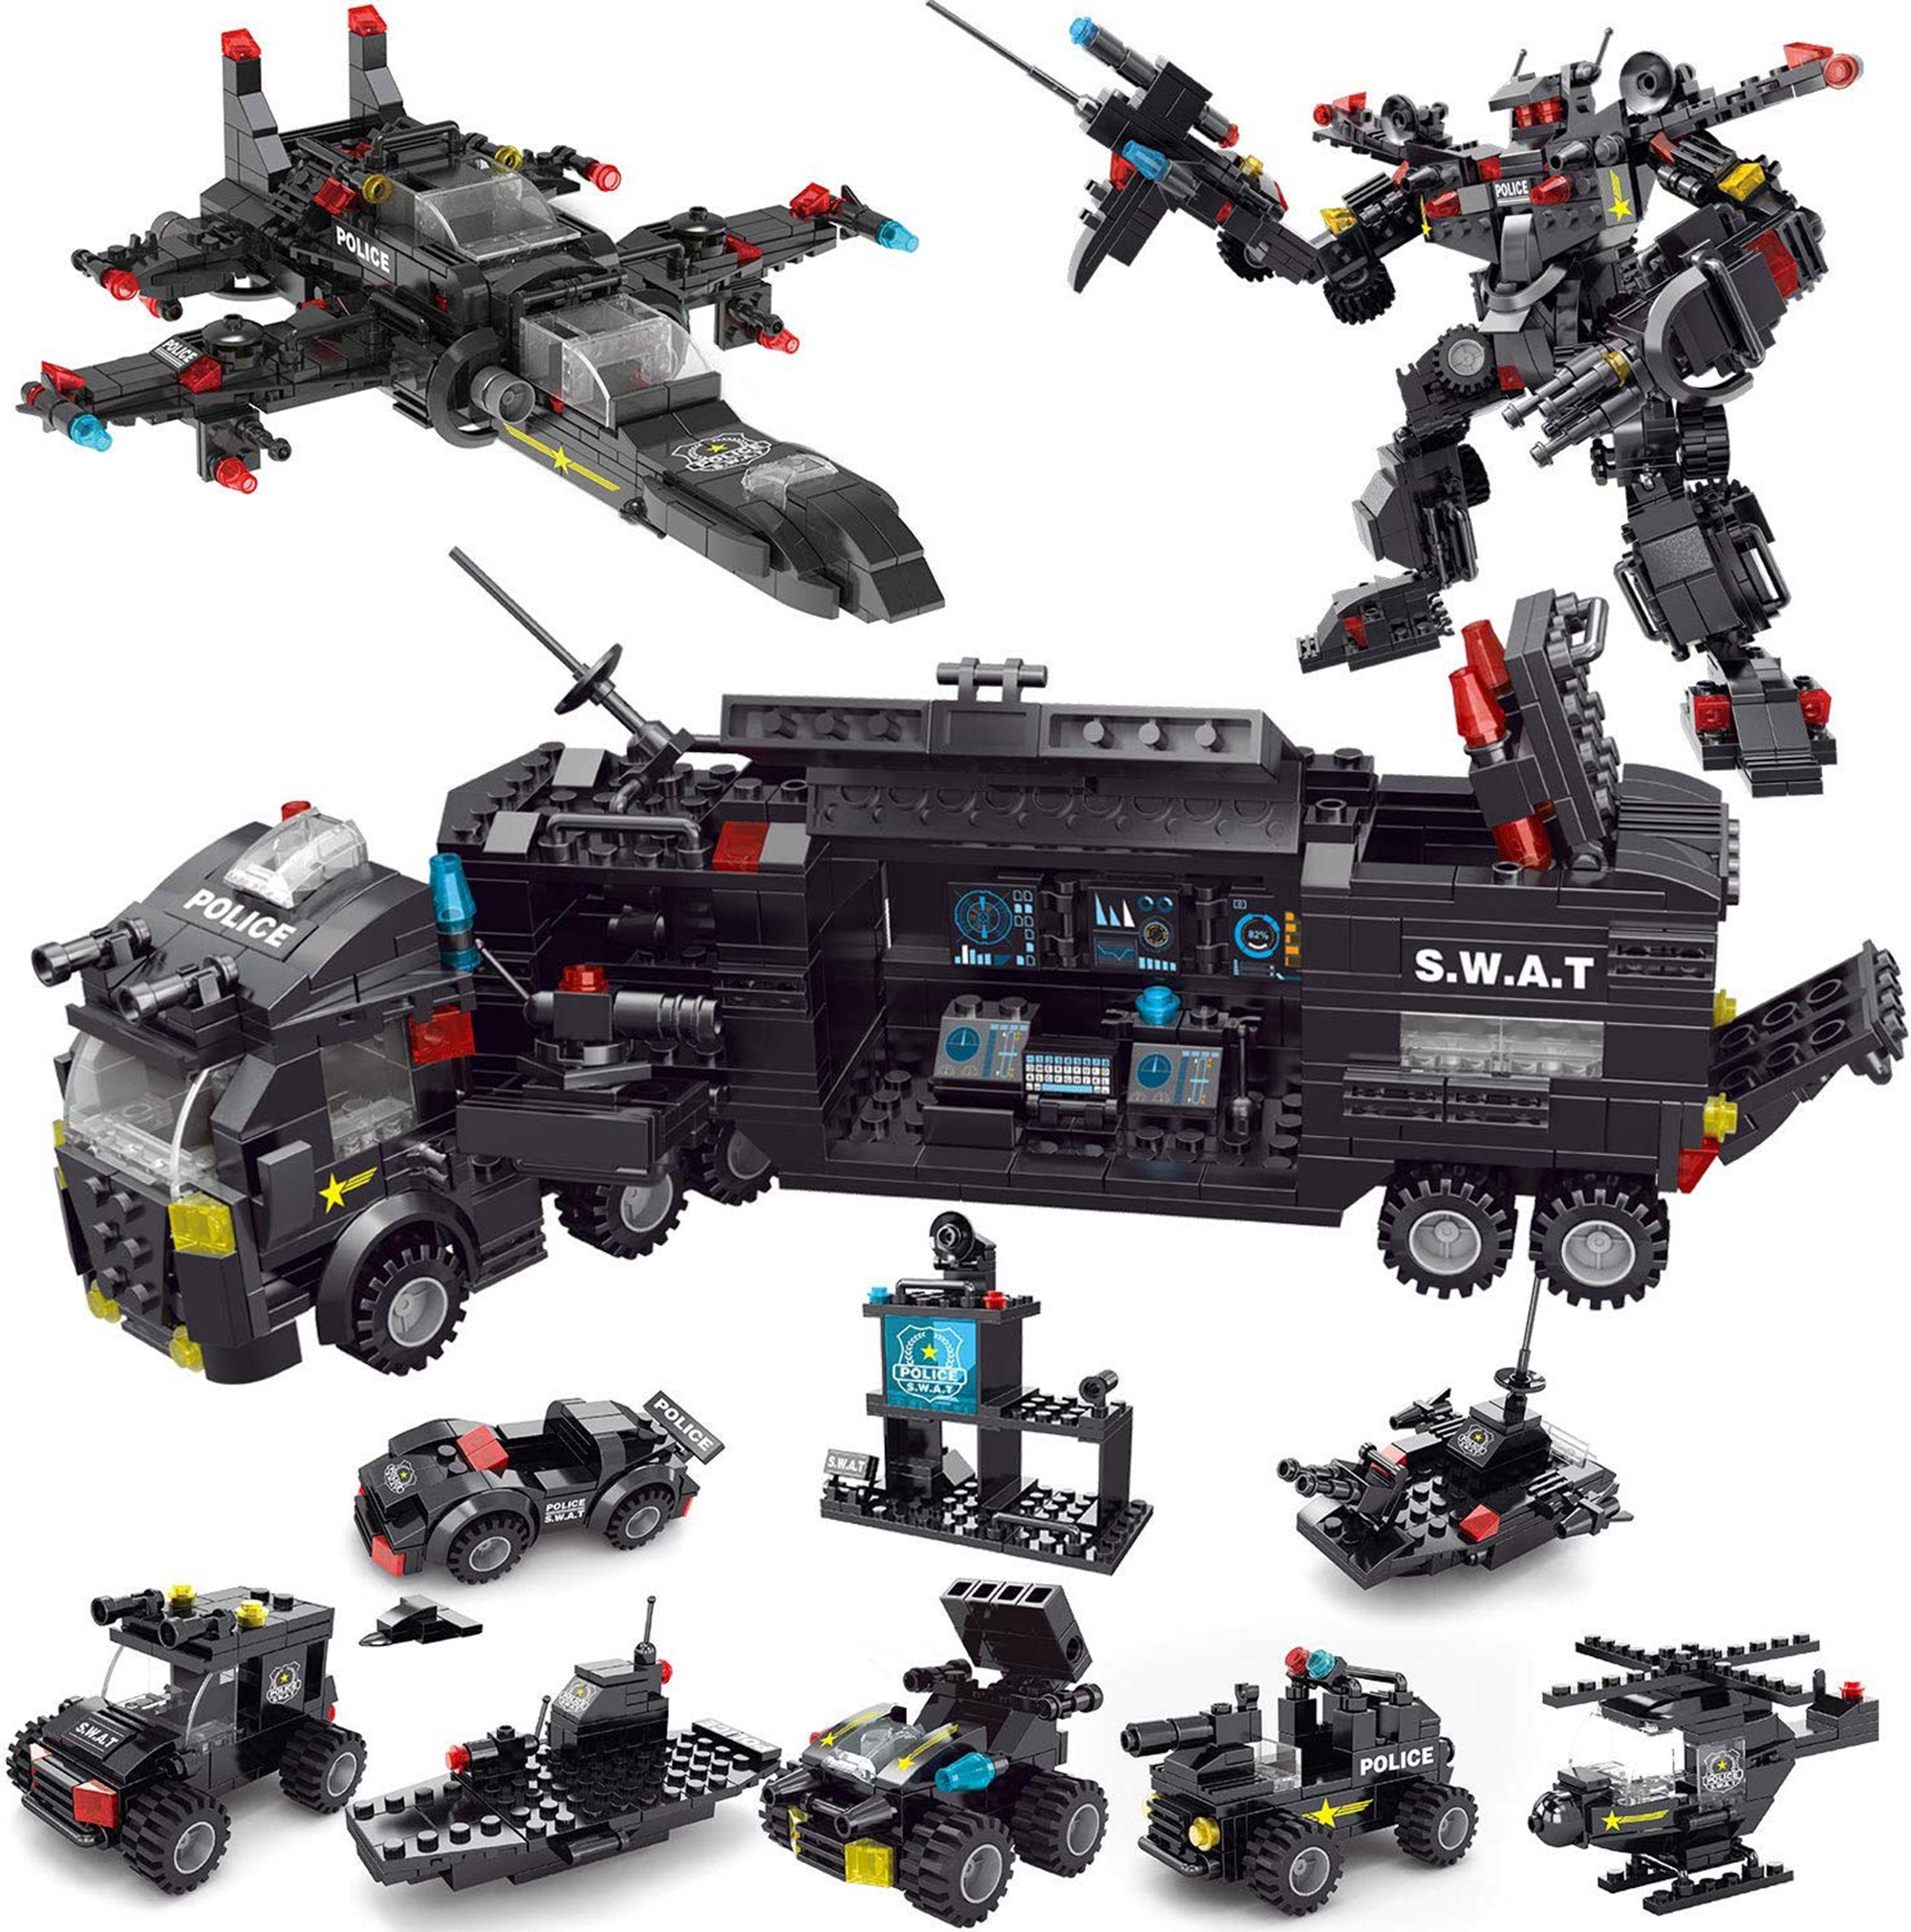 700 PCs Police Truck Building Blocks Set in 25 Different Models, 8-in-1 Creative Police Car Toys for Kids Xmas Present F-540 - image 1 of 6